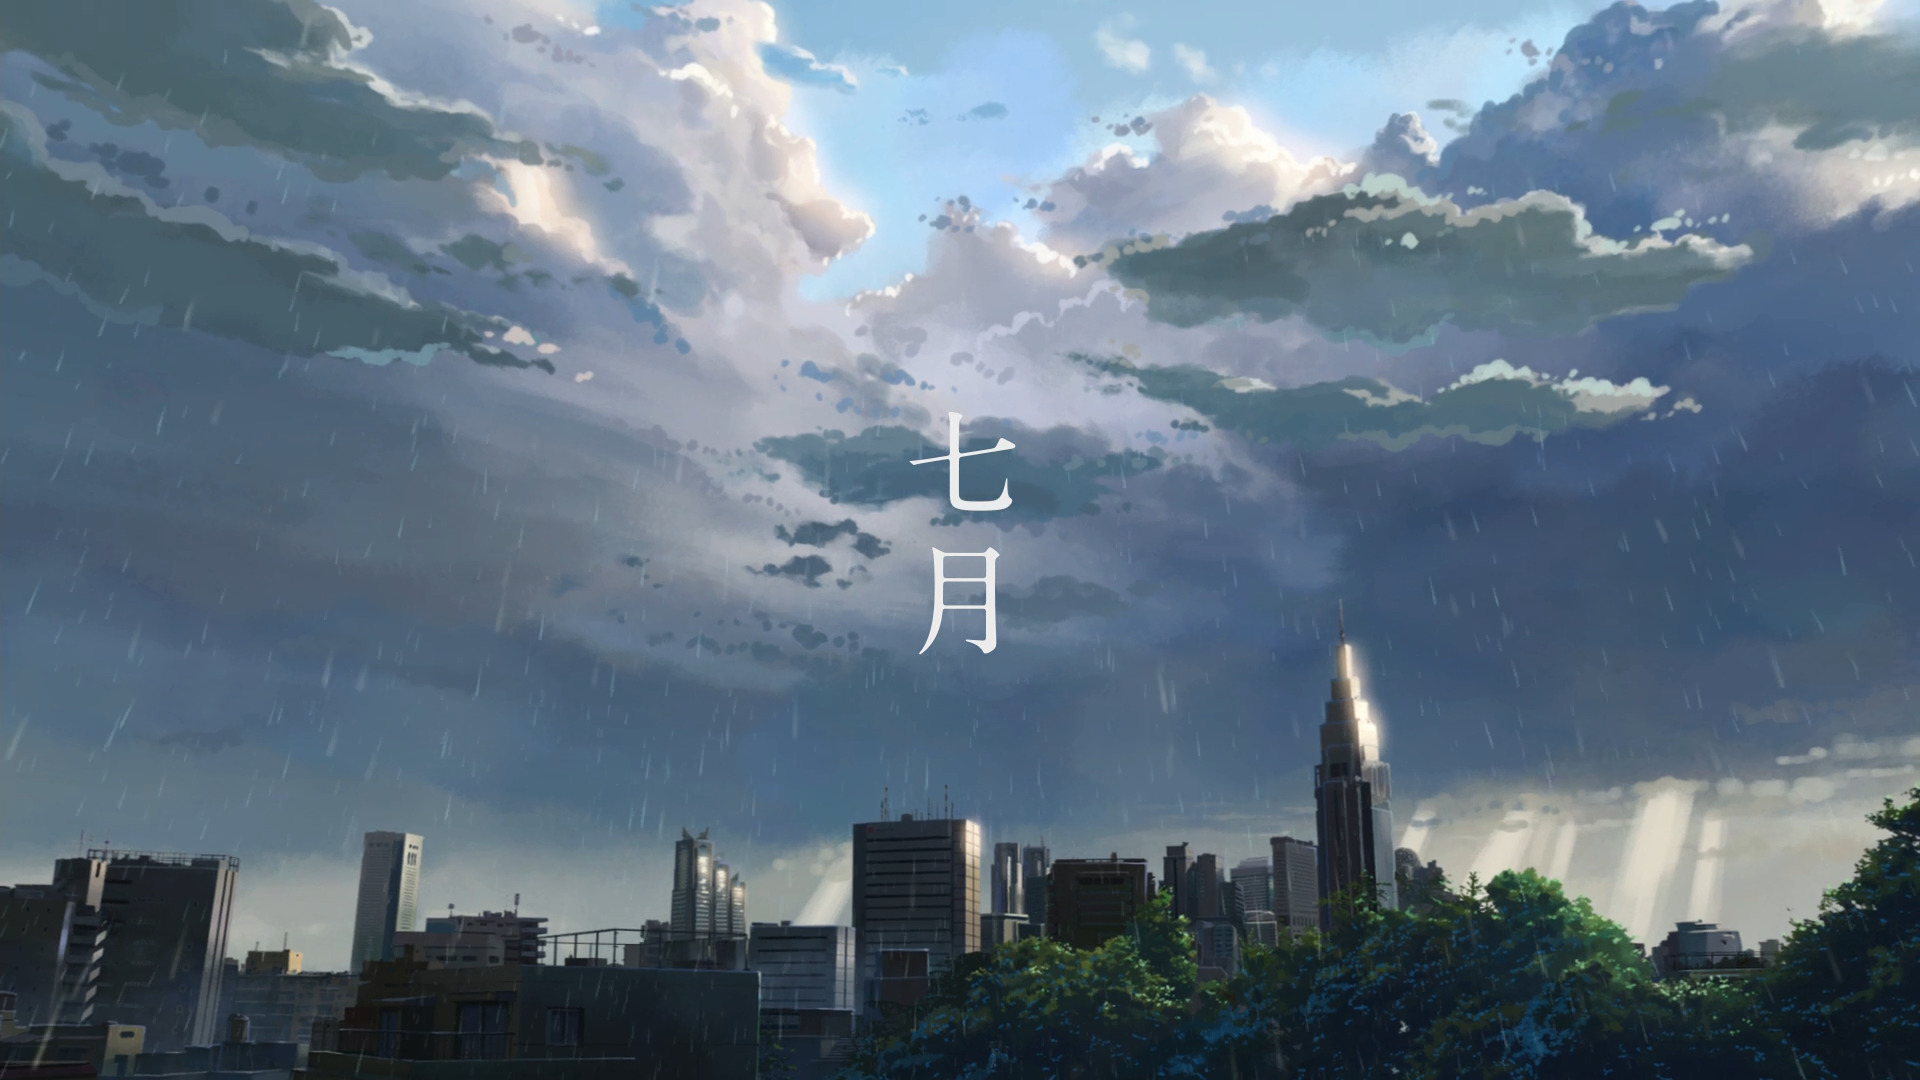 Here are 100x 15360 x 8640 anime wallpapers taken directly from the HDR  blu-ray of the movies Your Name and The Garden of Words. I have  filtered, color corrected, and upscaled them